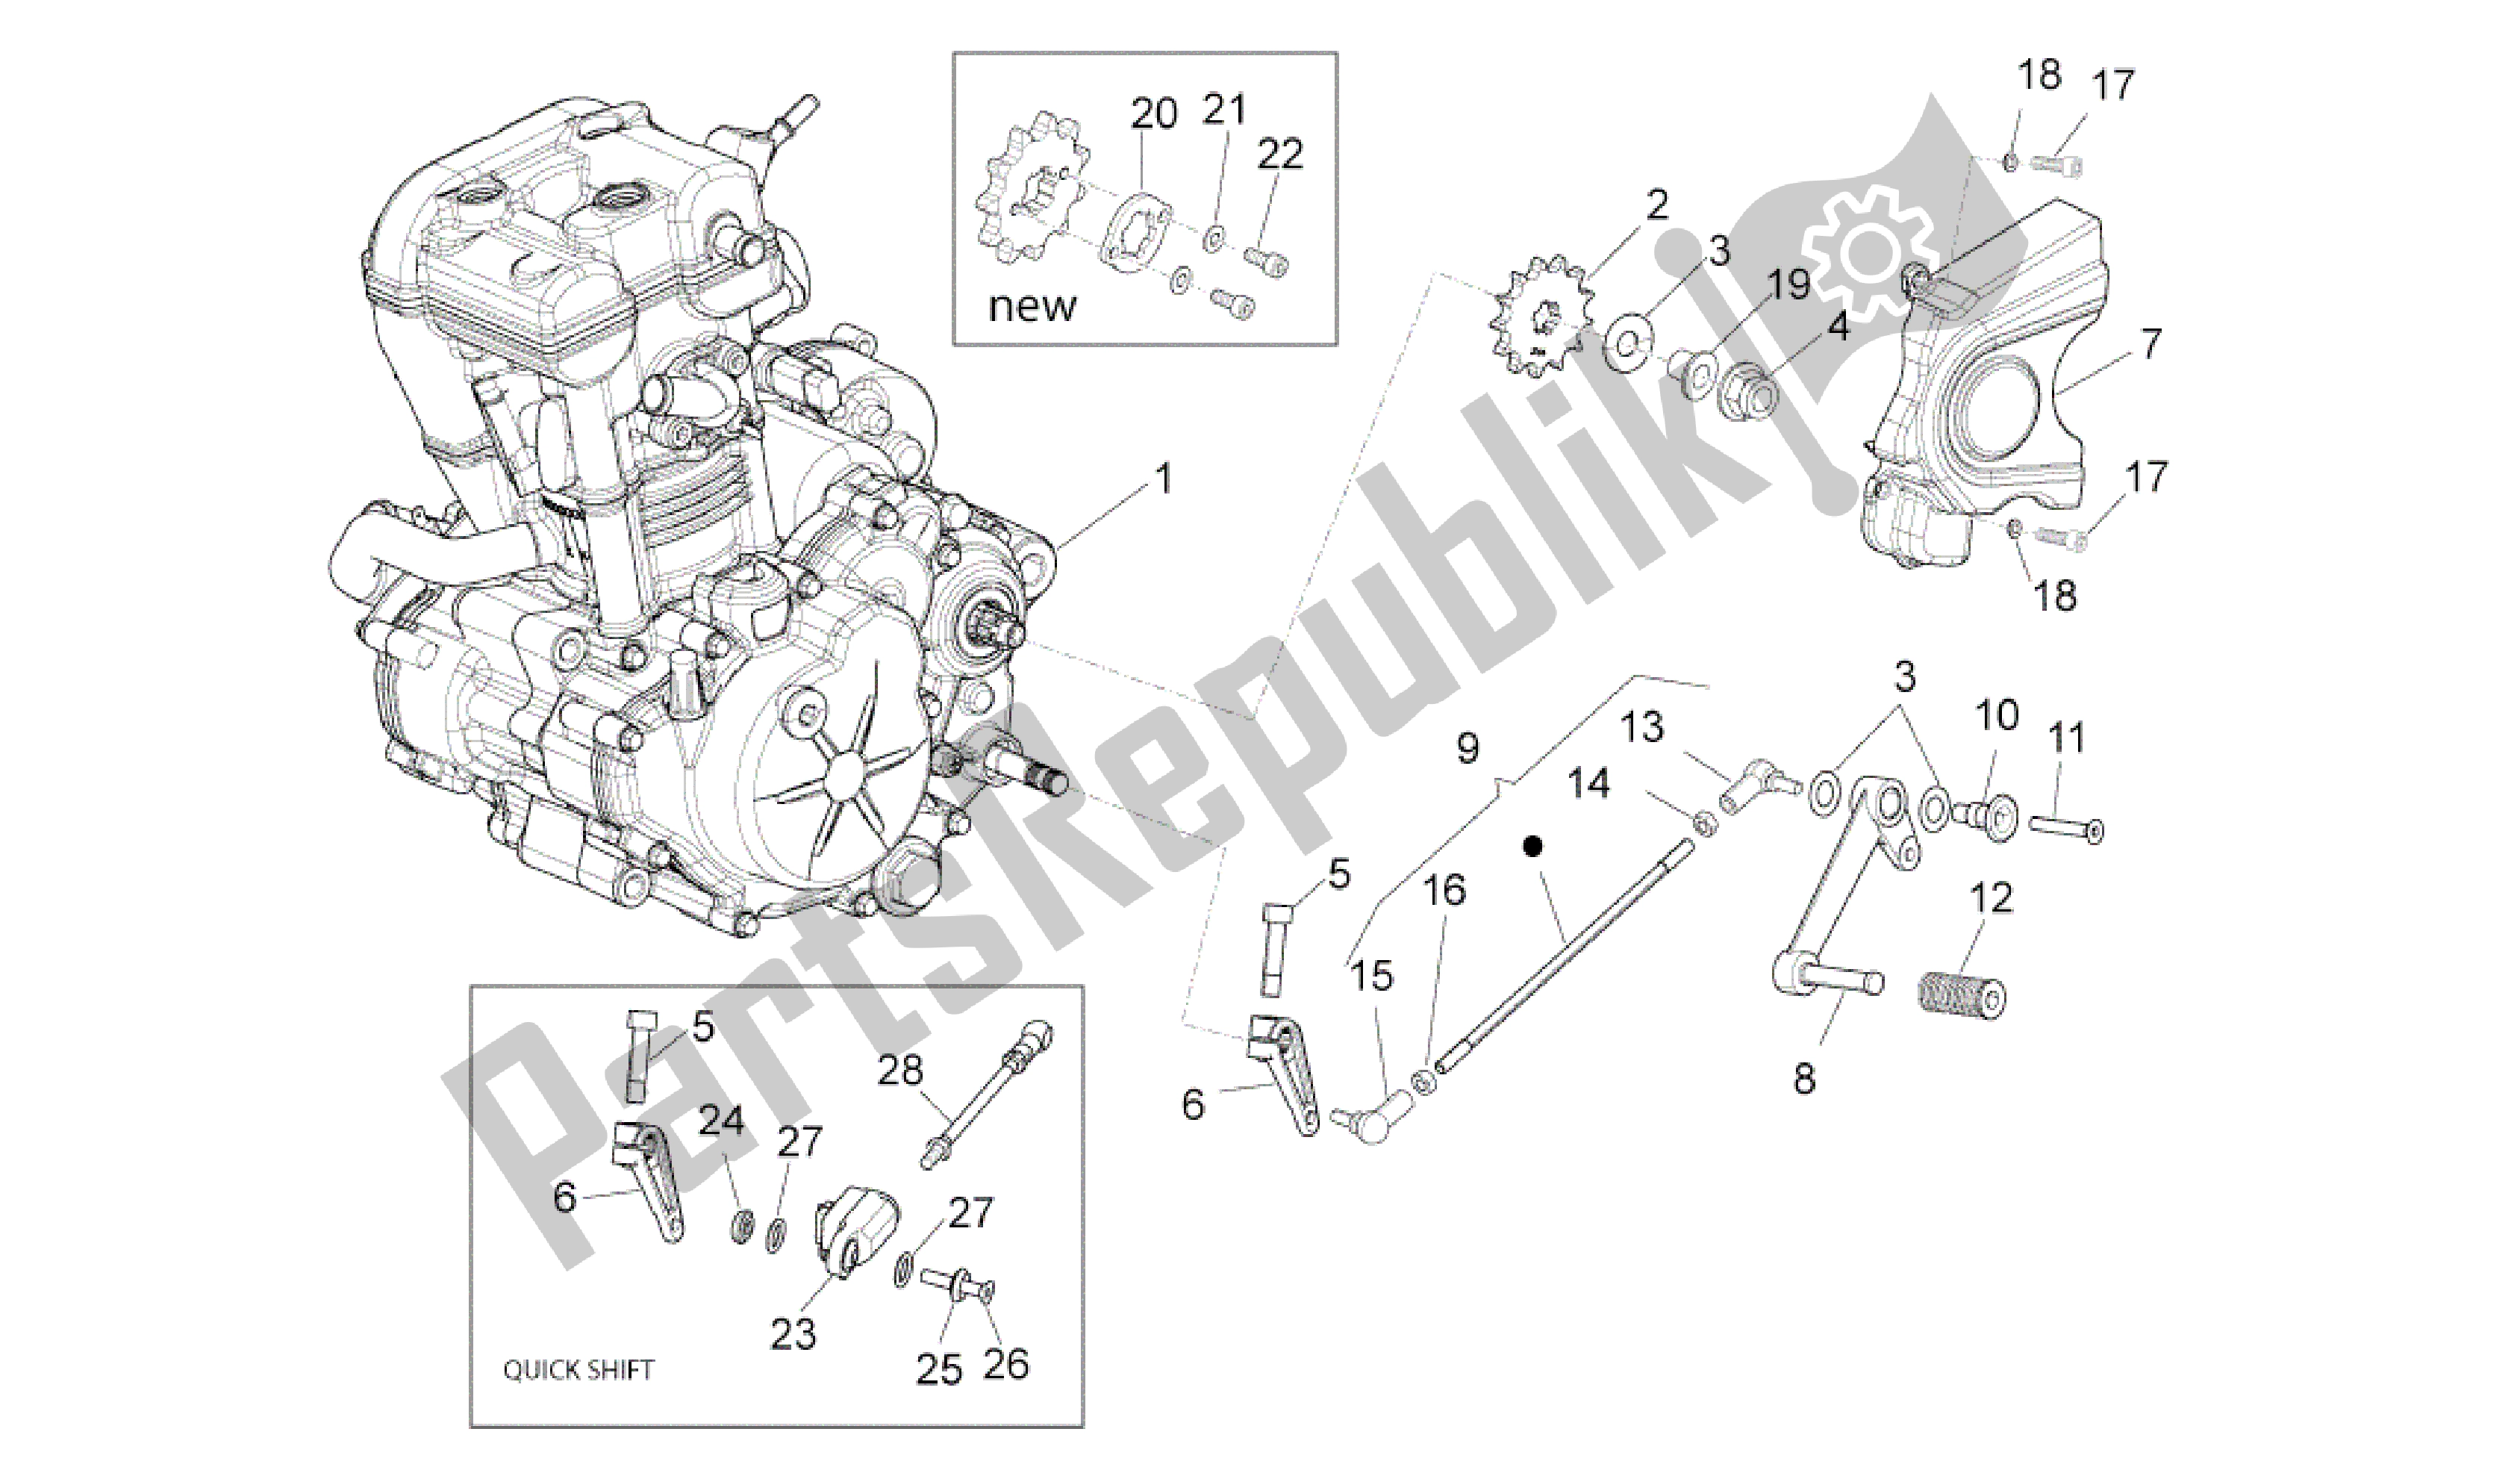 All parts for the Engine-completing Part-lever of the Aprilia RS4 125 2011 - 2013